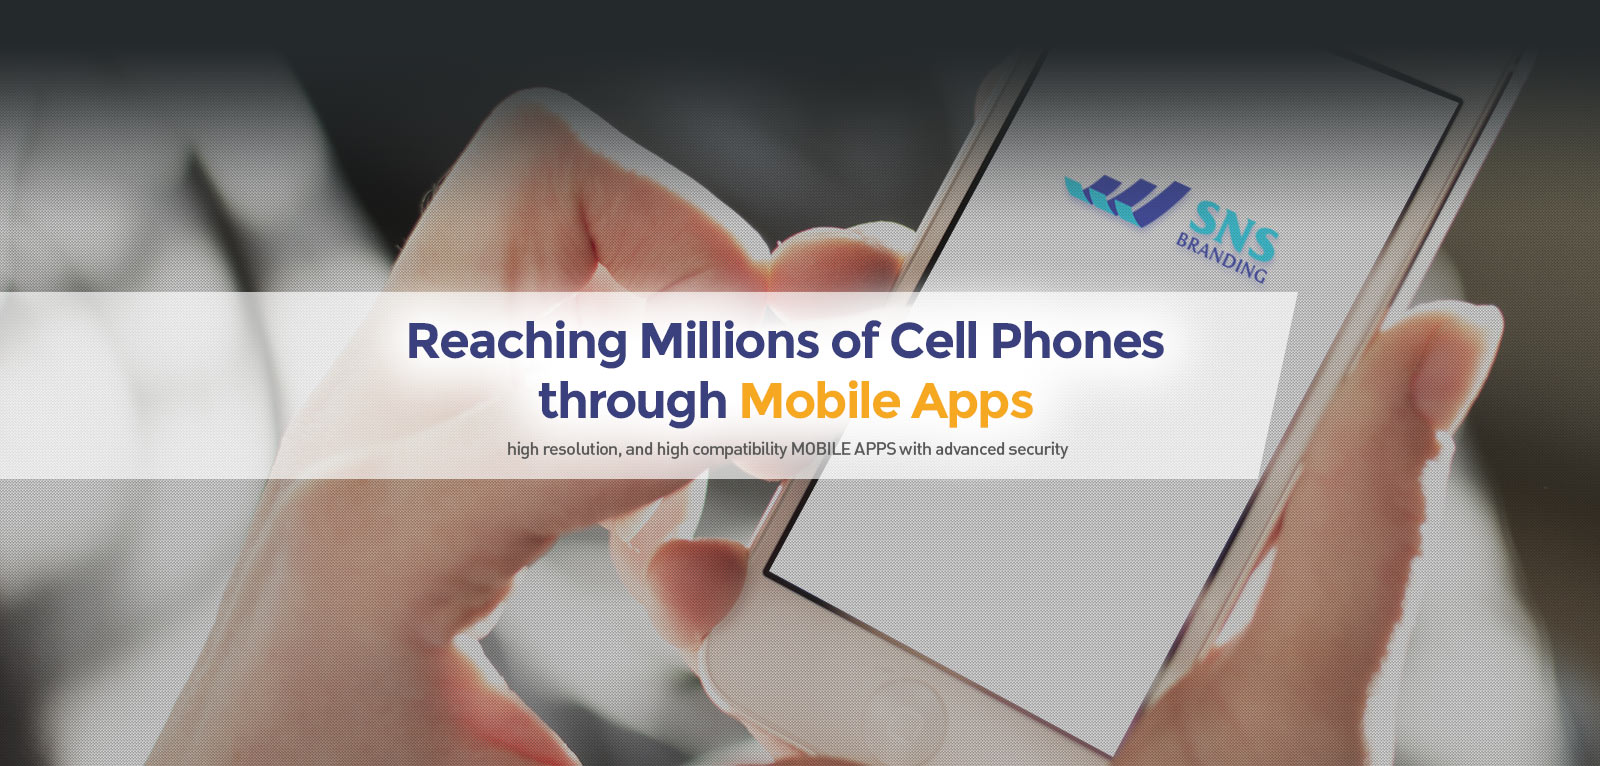 Reaching Millions of Cell Phones through Mobile Apps